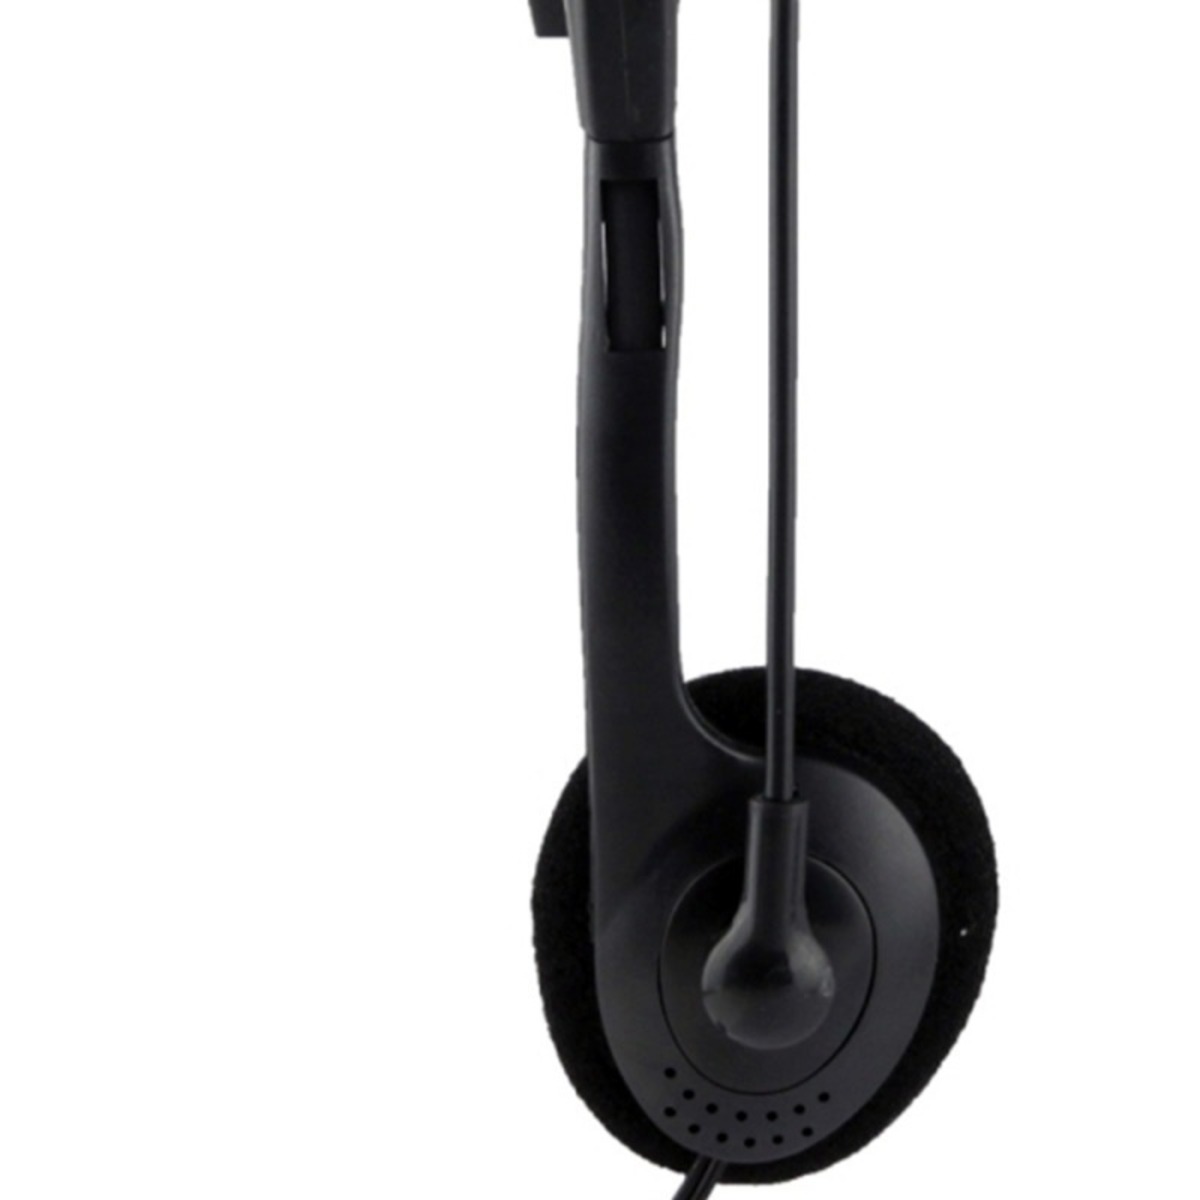 Iends Stereo High Quality Multimedia Headset with Microphone HS930